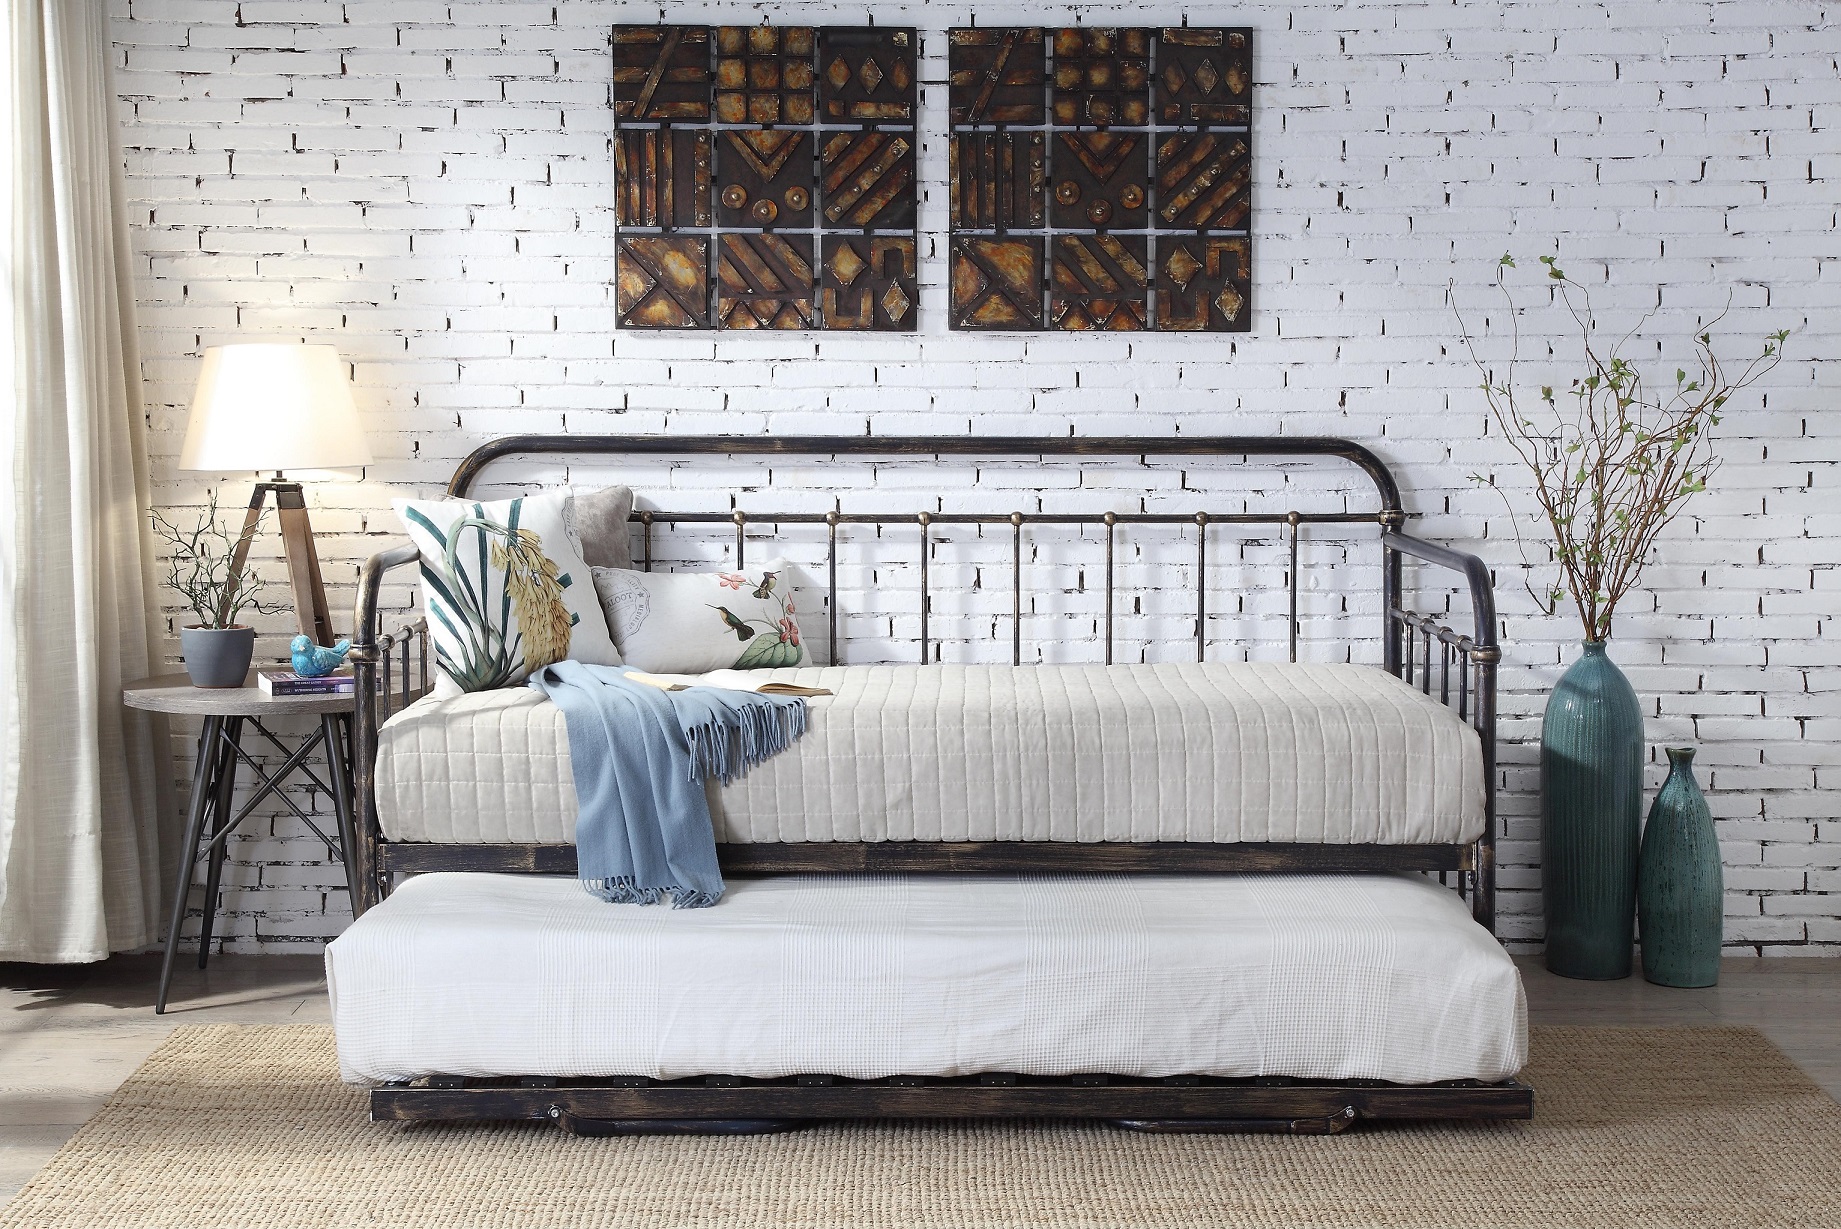 Harlow Brushed Antiqued Metal Day Bed With Trundle